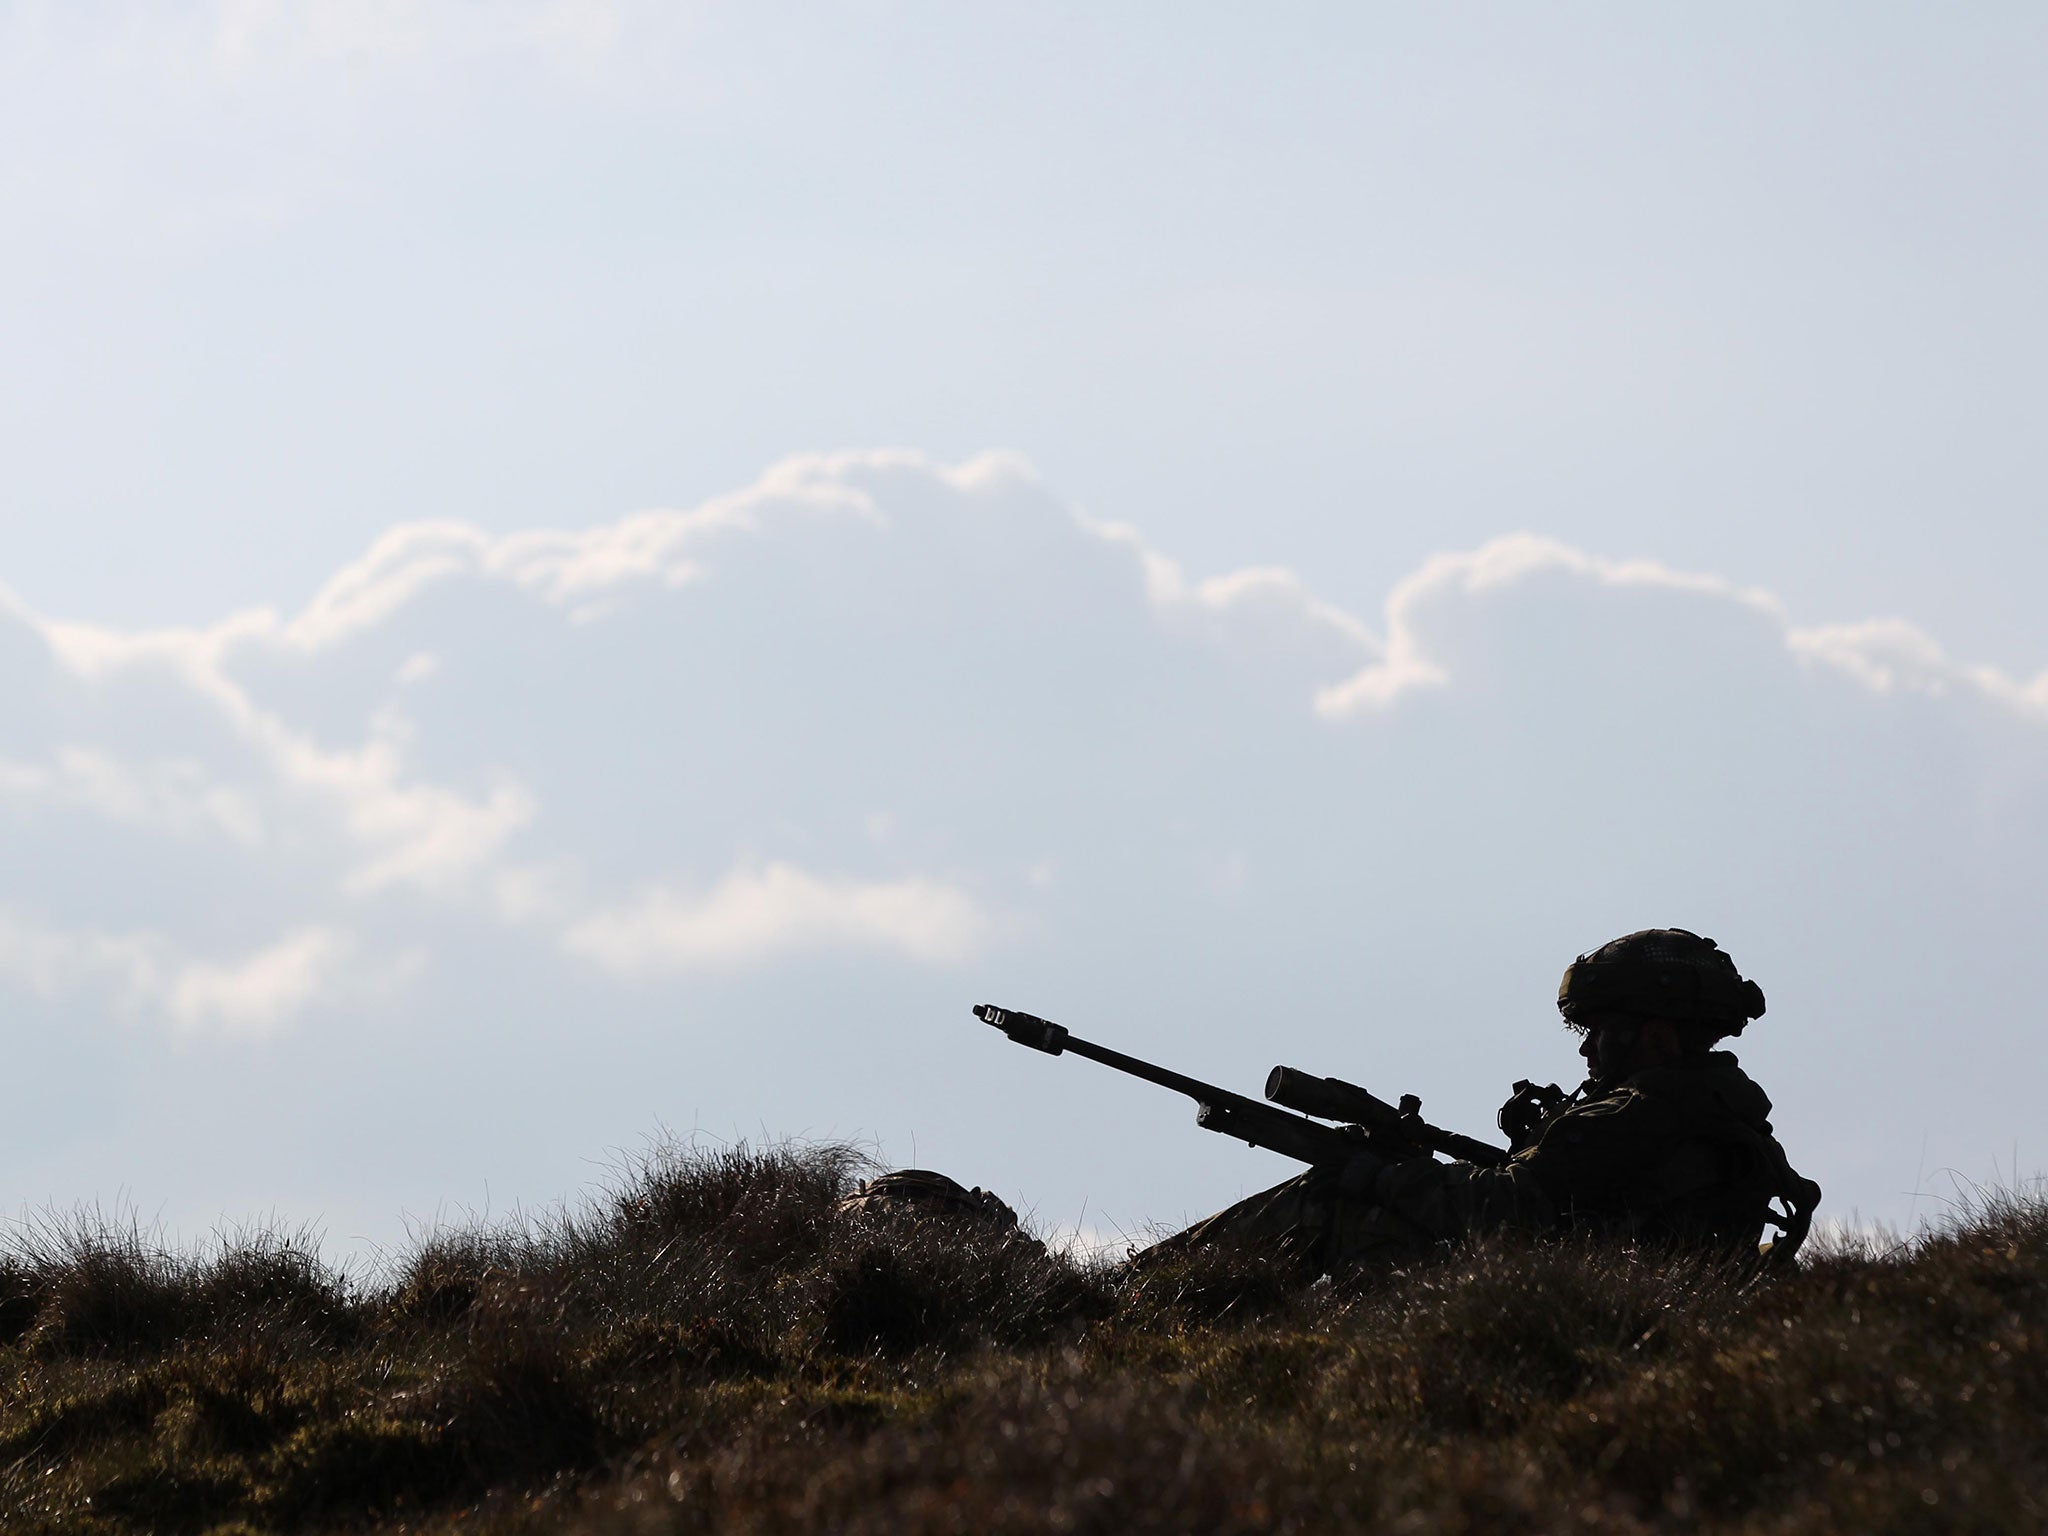 A sniper secures as area during the 16 Air Assault Brigade Exercise Joint Warrior at West Freugh Airfield, Stranraer, Scotland on April 16, 2012.